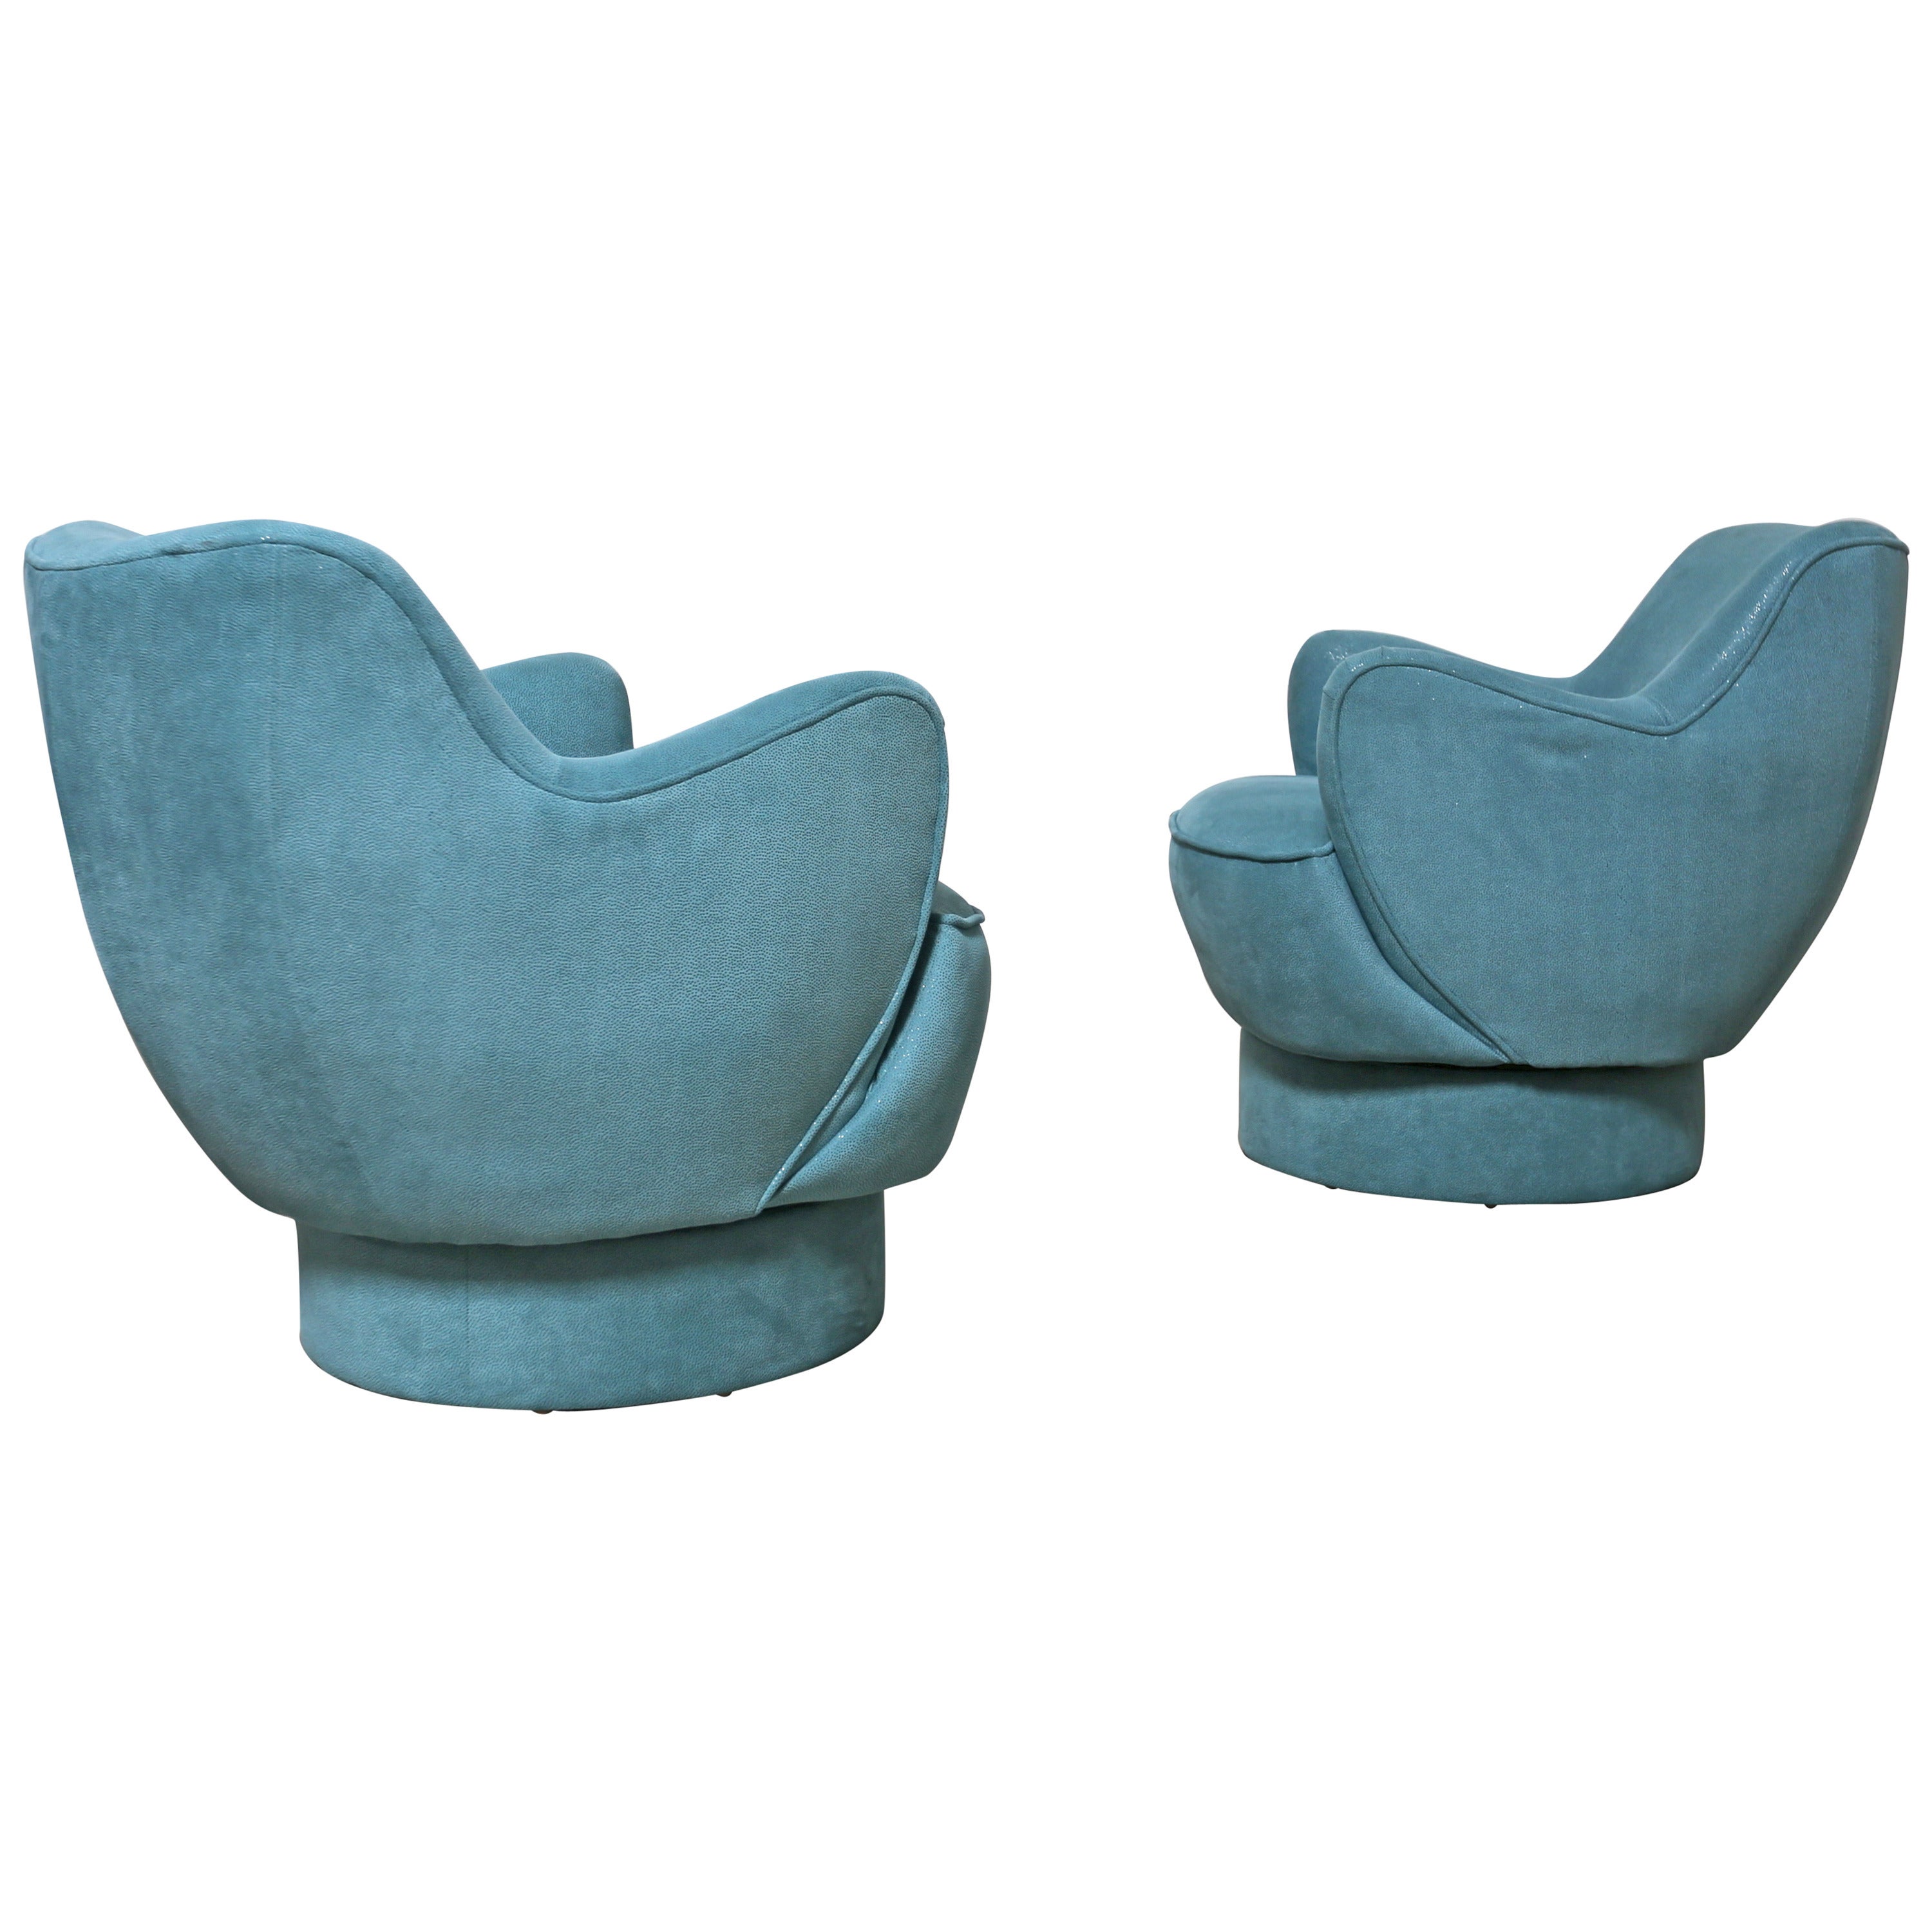 Pair of Barrel Swivel Lounge Chairs by Vladimir Kagan for Directional